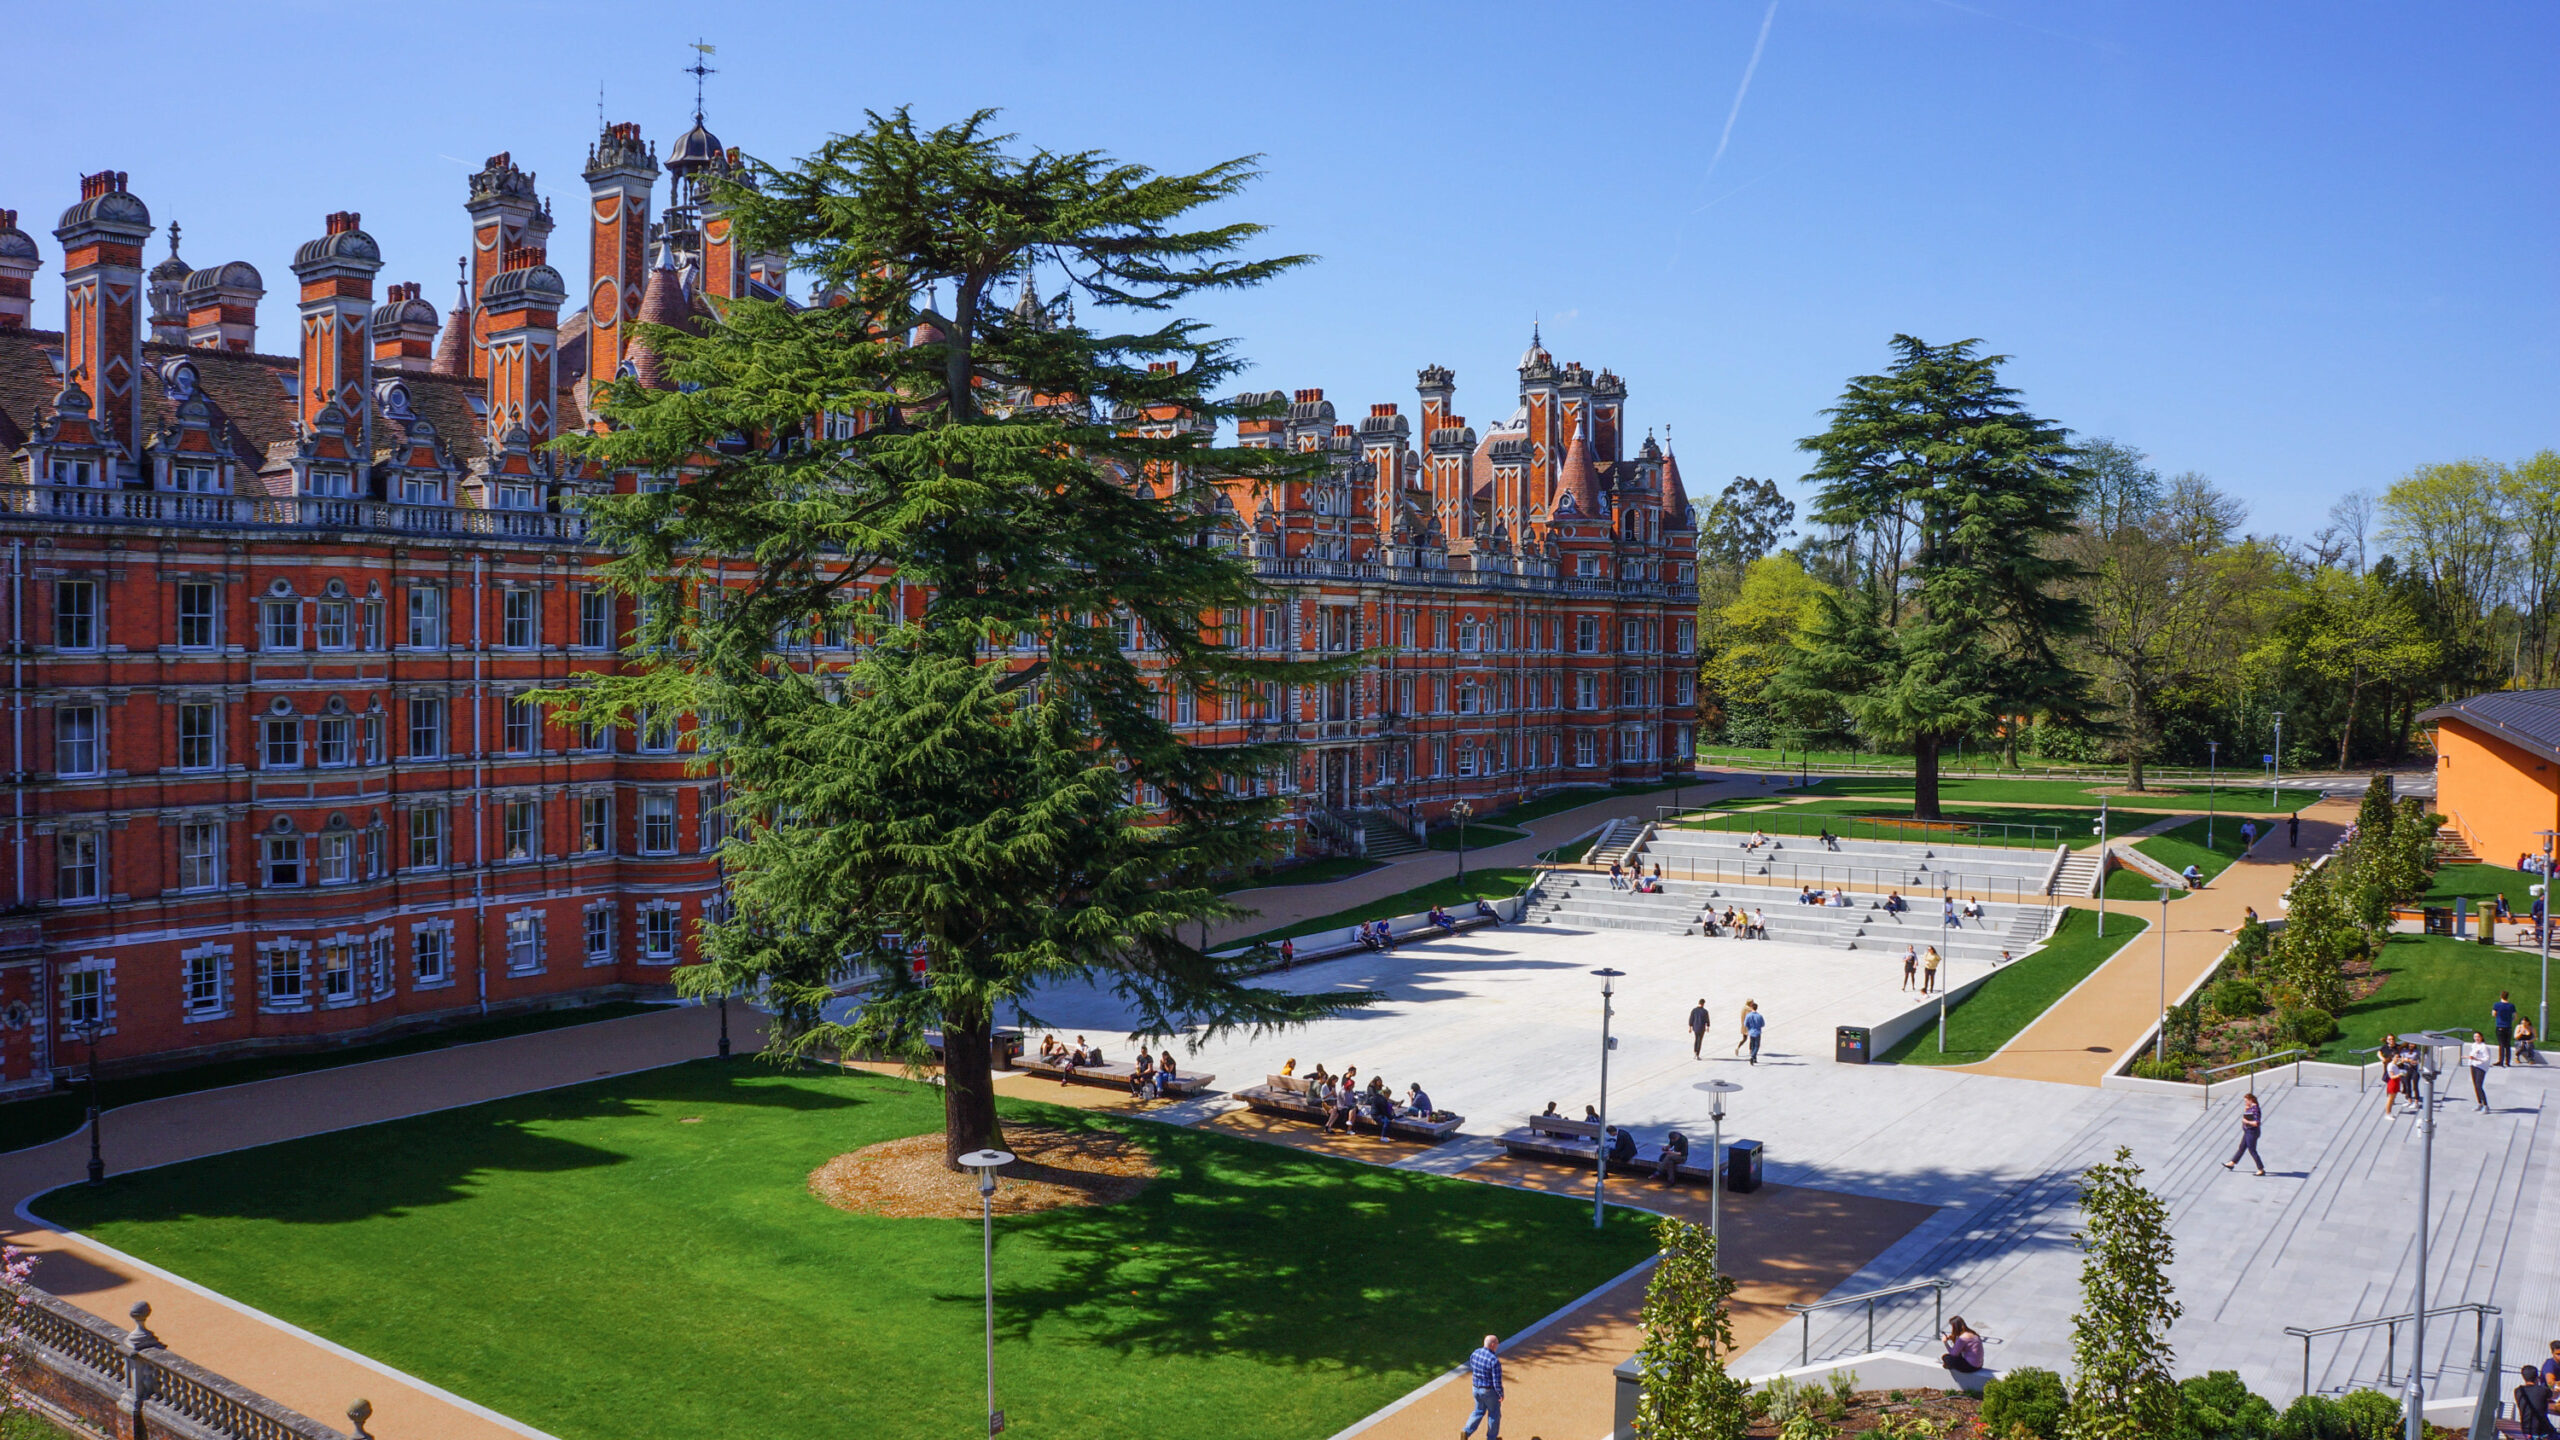 Royal Holloway main building with square and students sitting on steps.